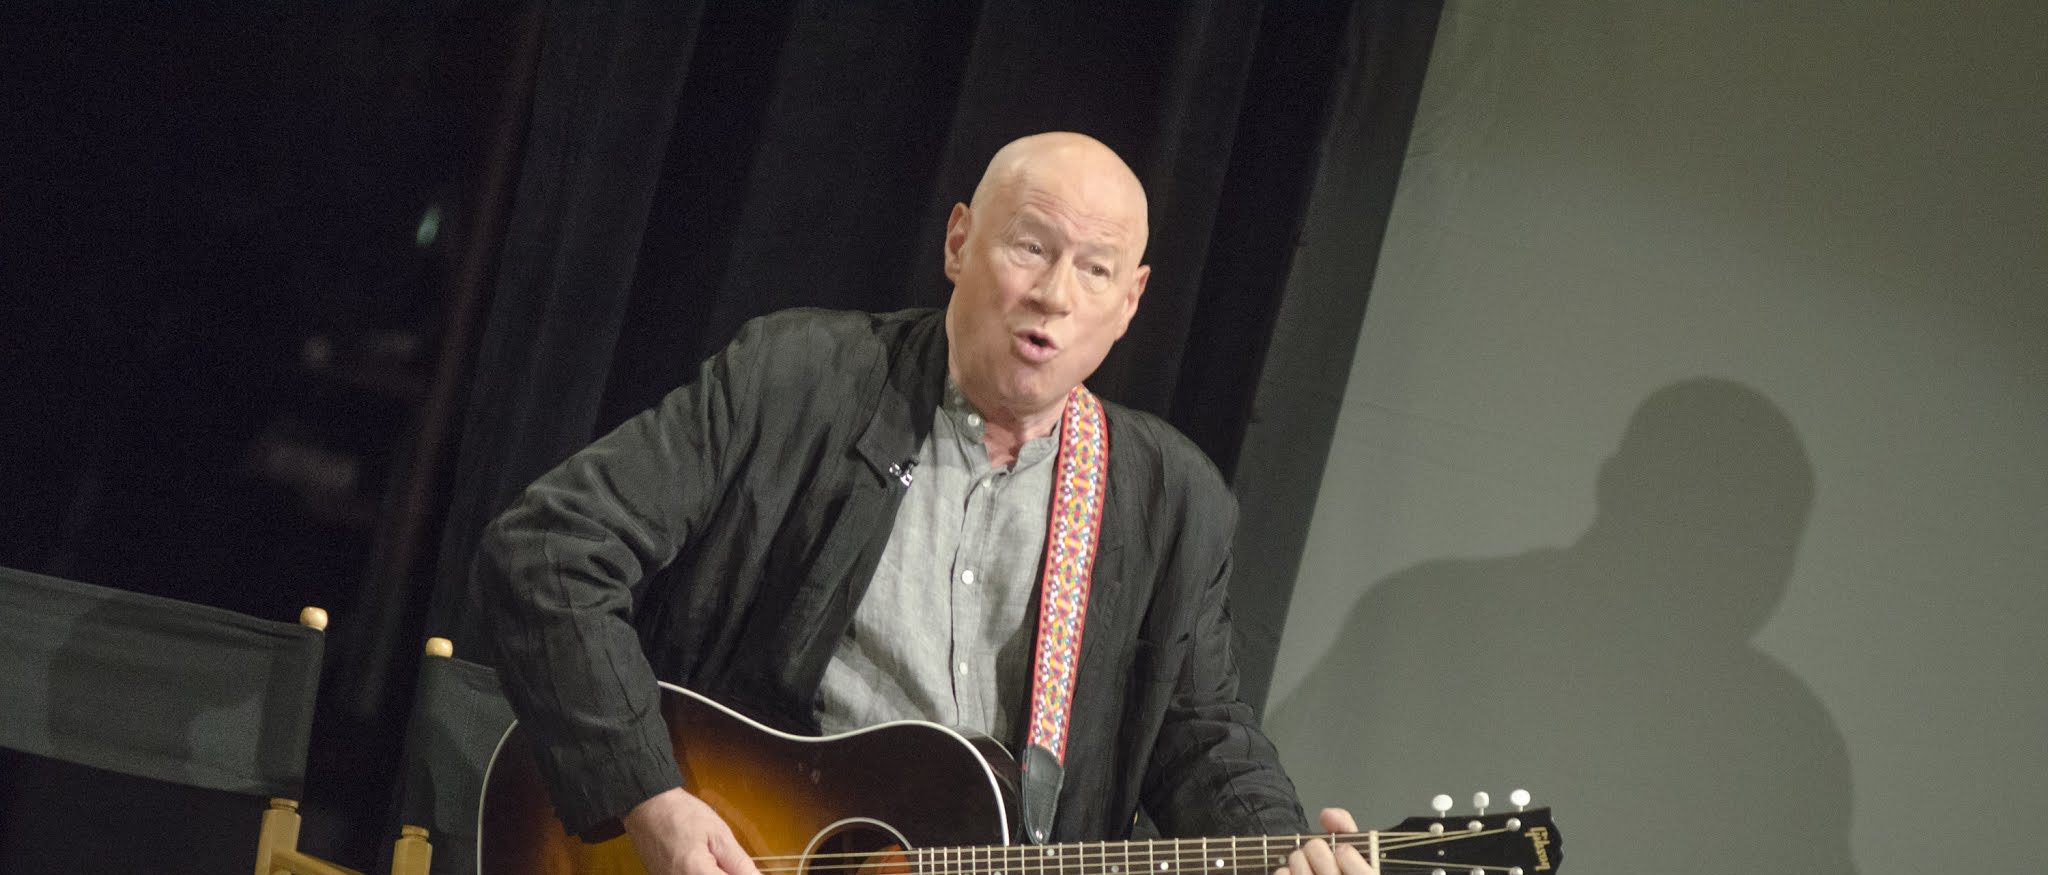 Neil Innes, ‘Monty Python’ Songwriter, Dead At 75 Years Old | The Daily Caller